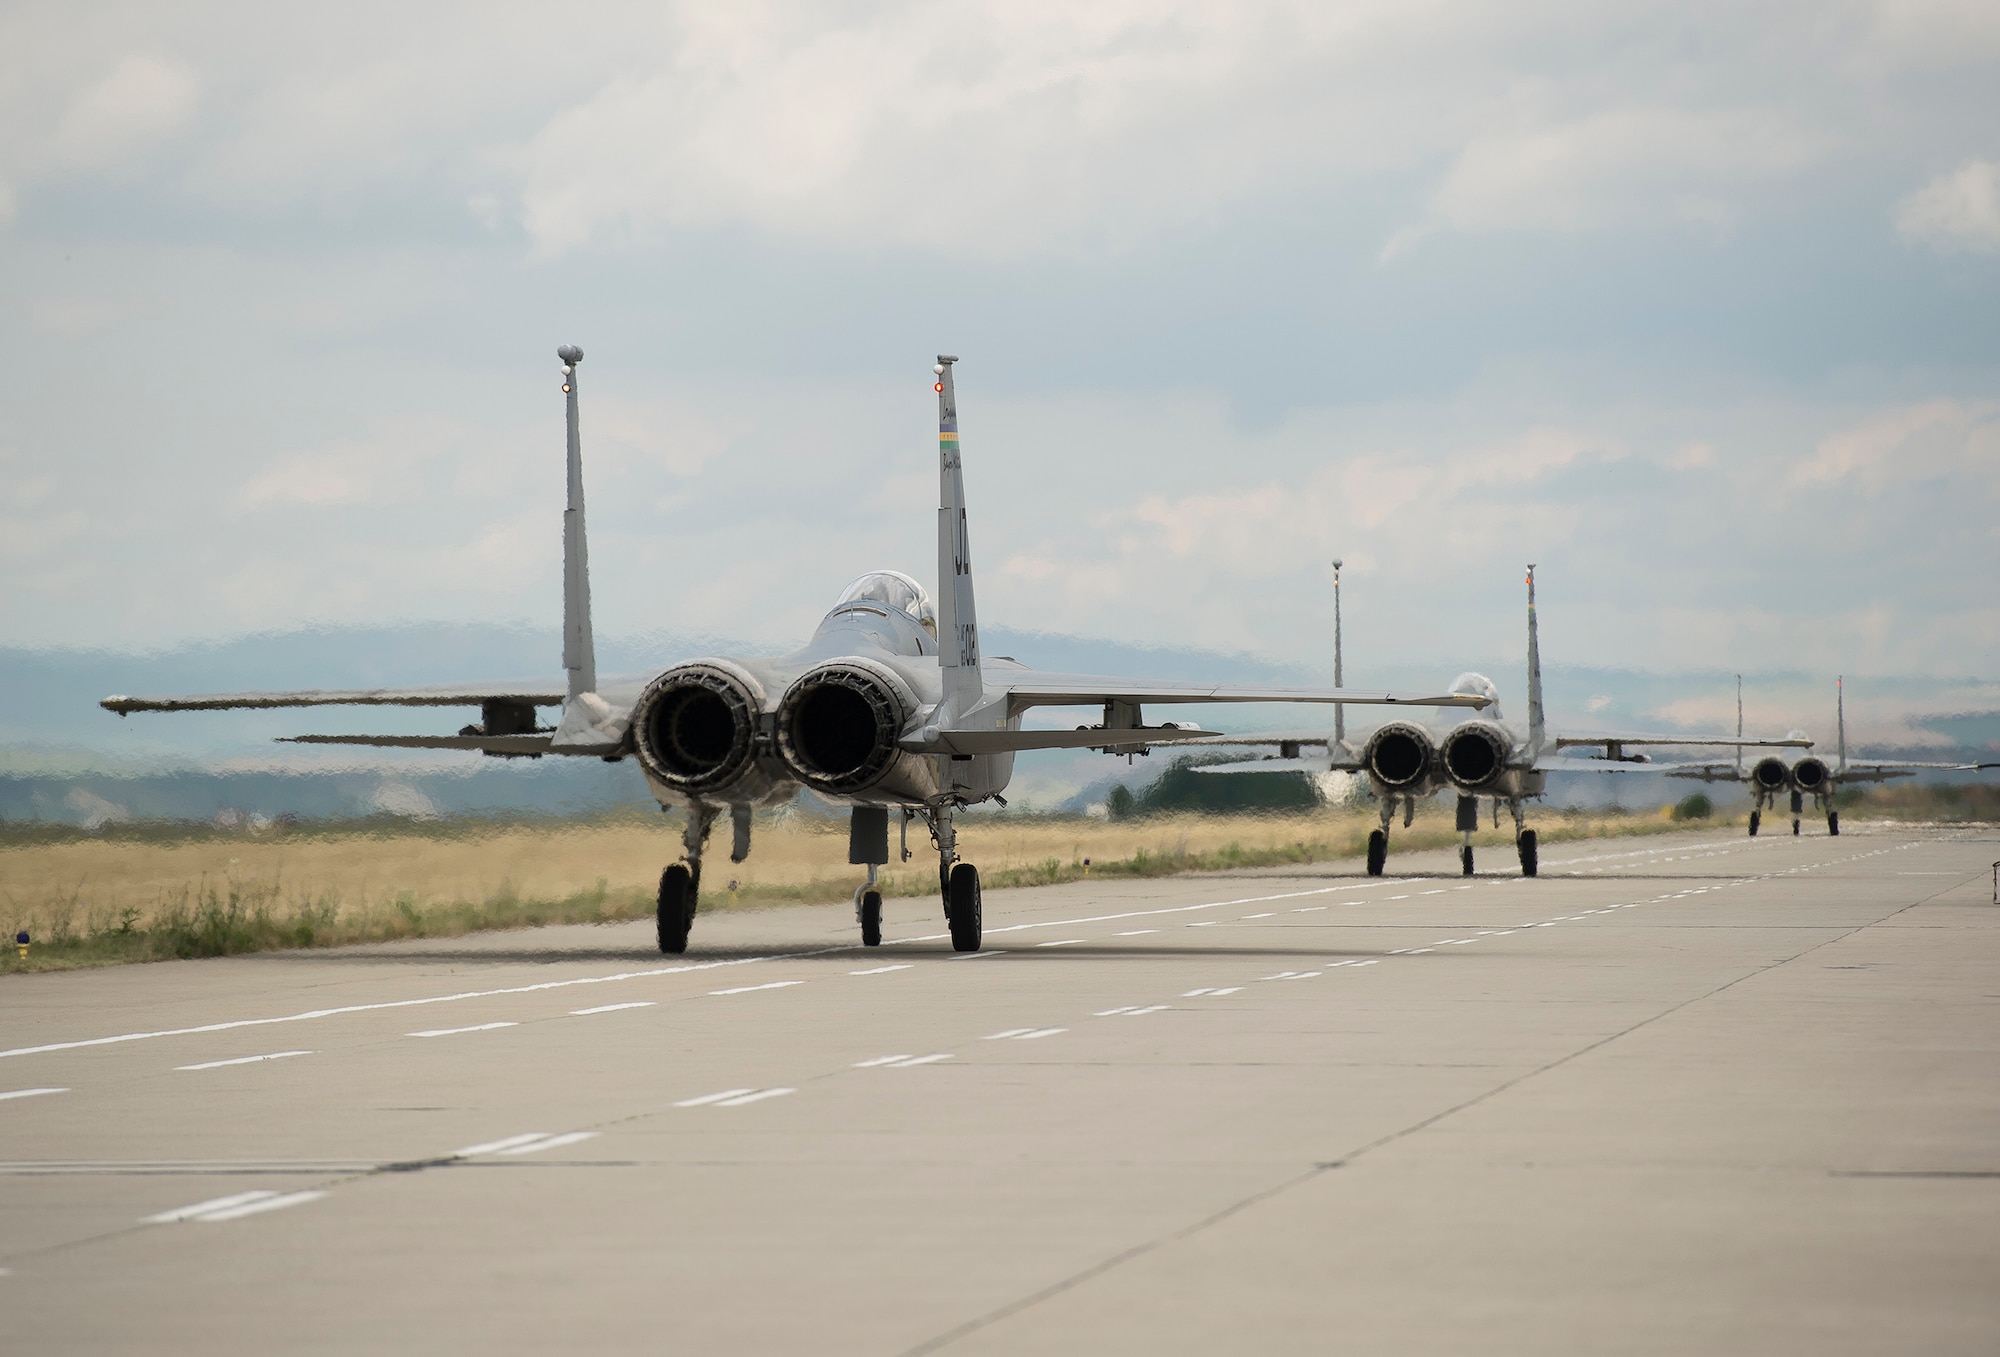 Three F-15C Eagle fighter aircraft from the 159th Expeditionary Fighter Squadron taxi prior to takeoff from Campia Turzii, Romania, July 13, 2017. The squadron is in Romania in support of Operation Atlantic Resolve, an ongoing operation meant to enhance the security of Europe and bolster partnership between NATO allies. (U.S. Air Force photo by Tech. Sgt. Chad Warren)